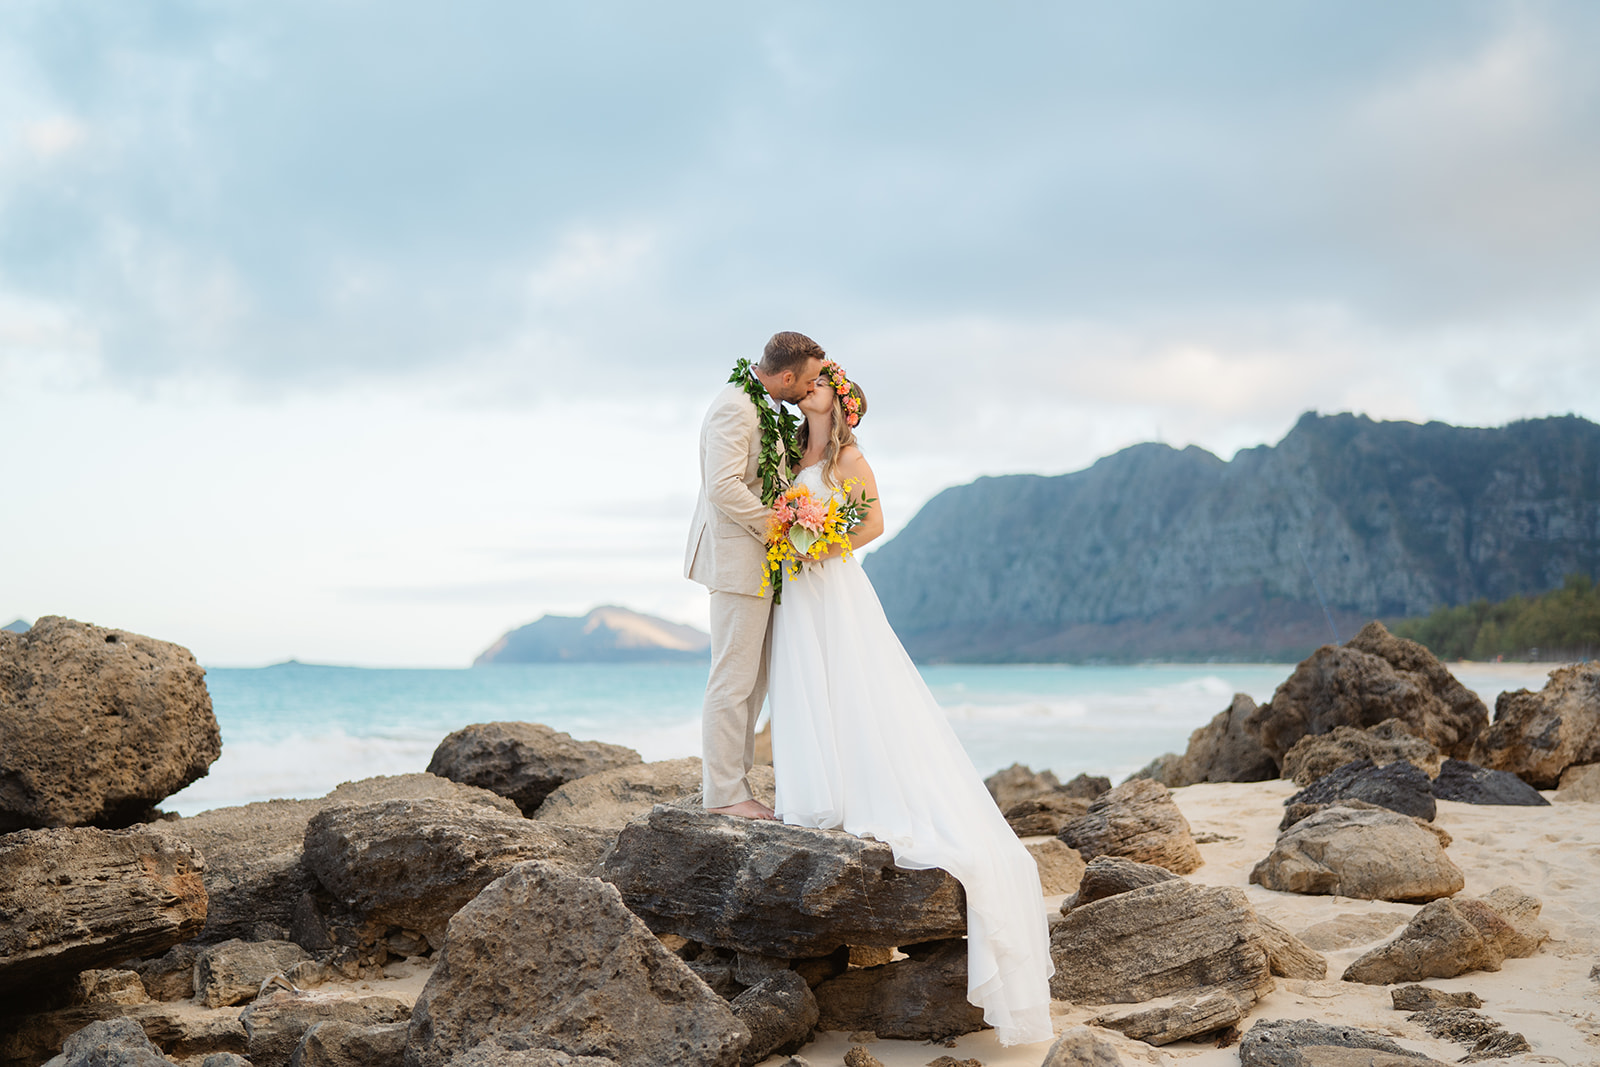 A bride and groom embrace on the beach during their oahu elopement by photographer Colby Moore.